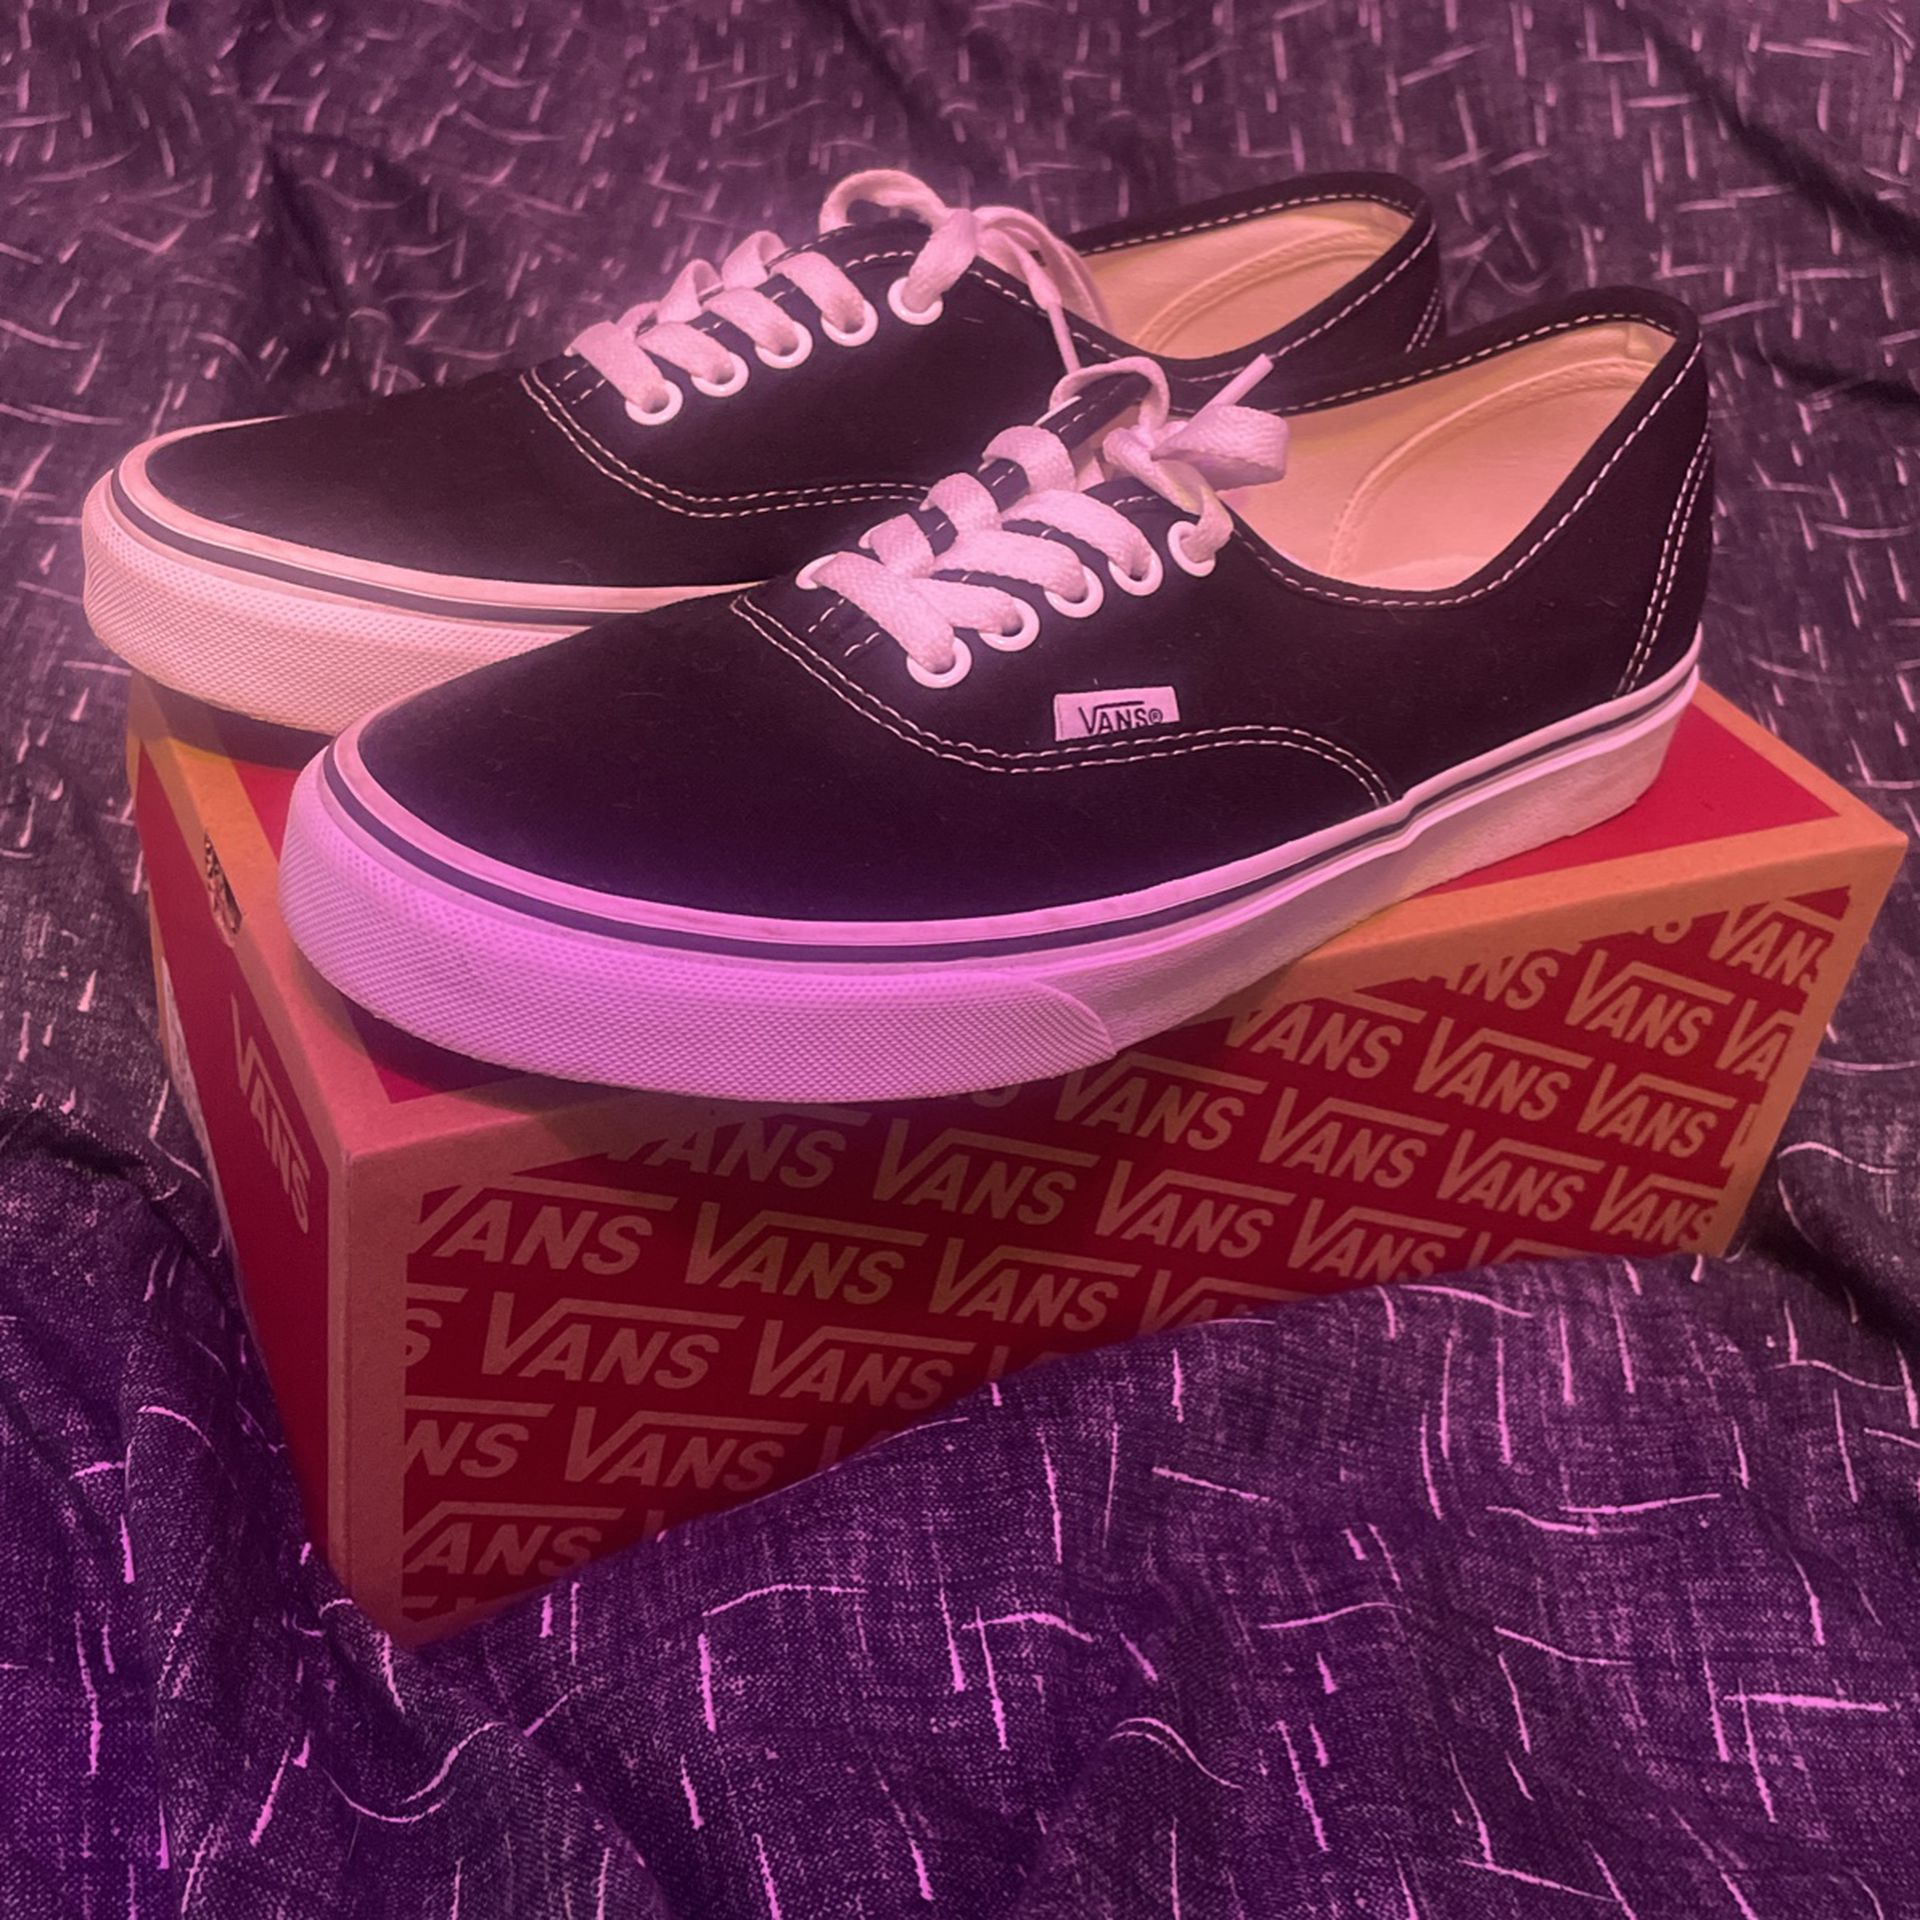 Vans black and white size 8.5